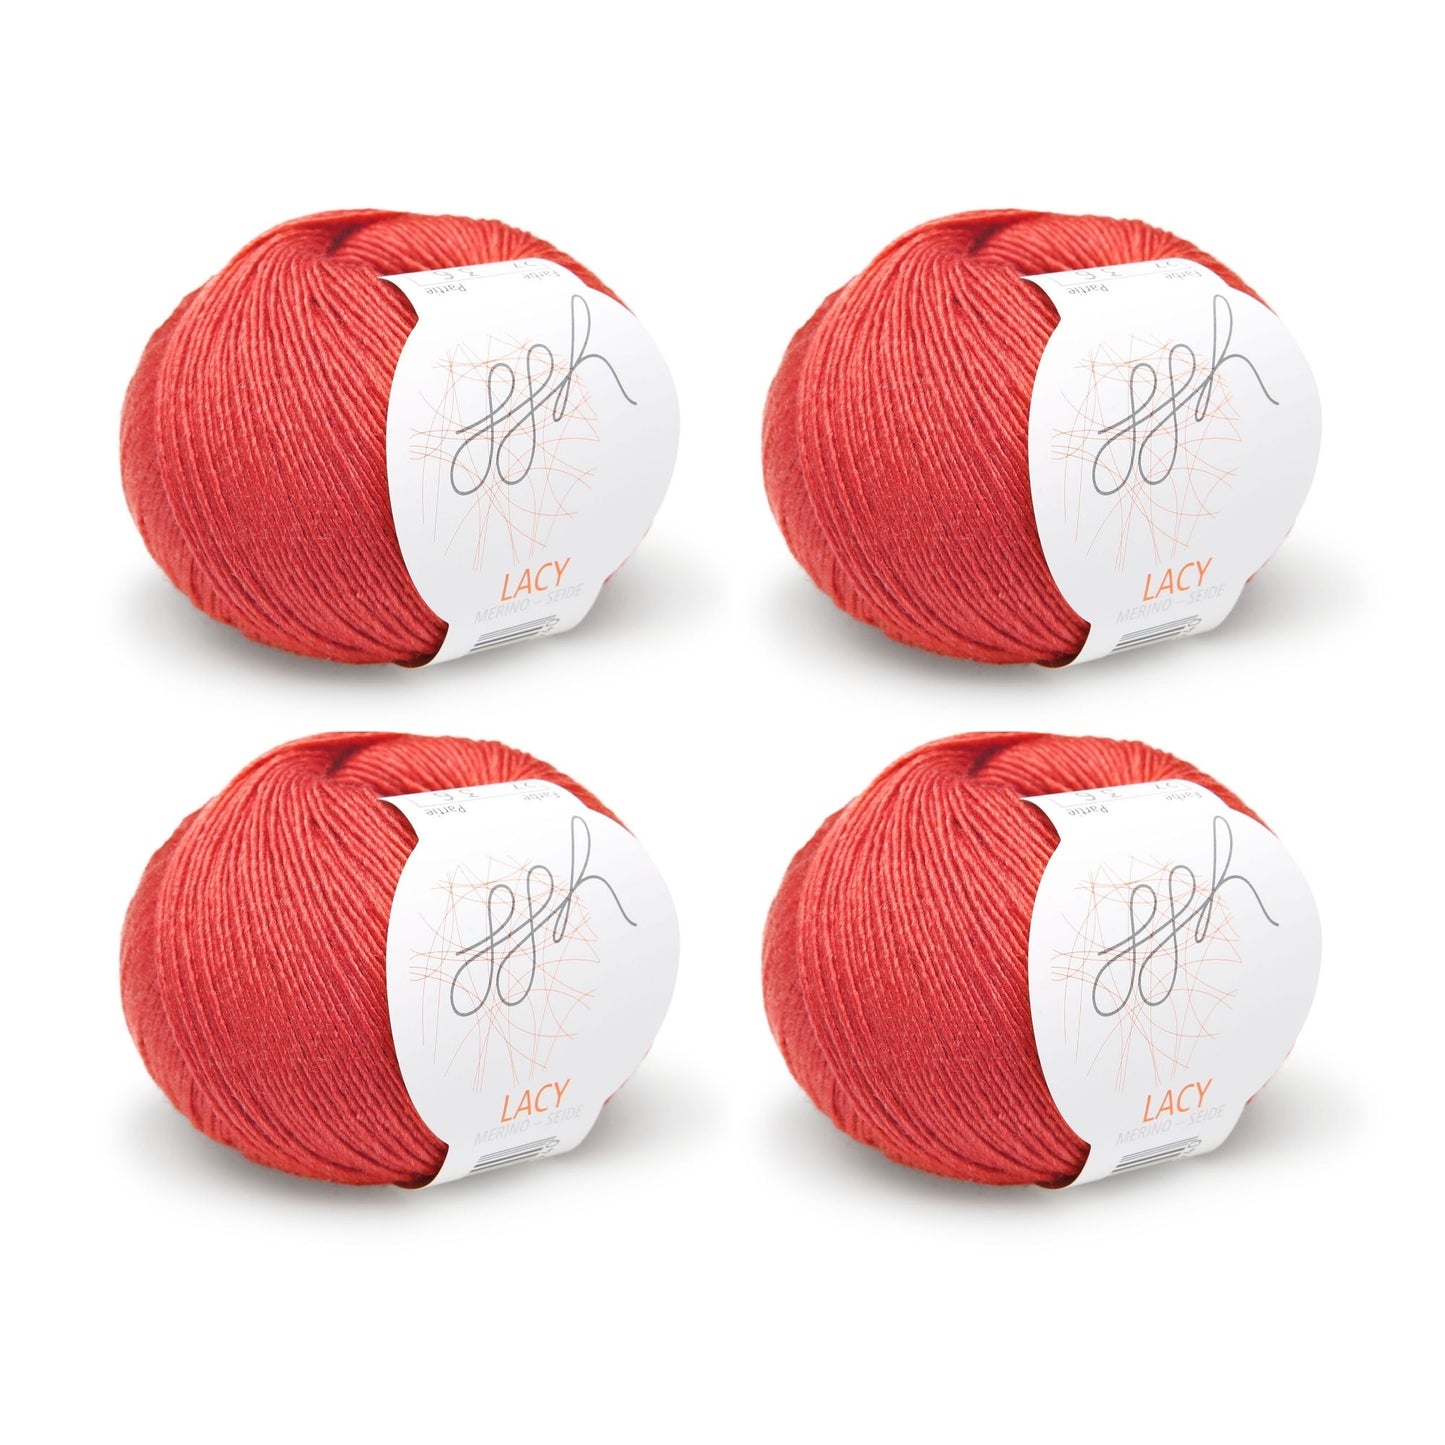 ggh Lacy | Set of 4 x 25g (total 100g) - 027 - Mars Red